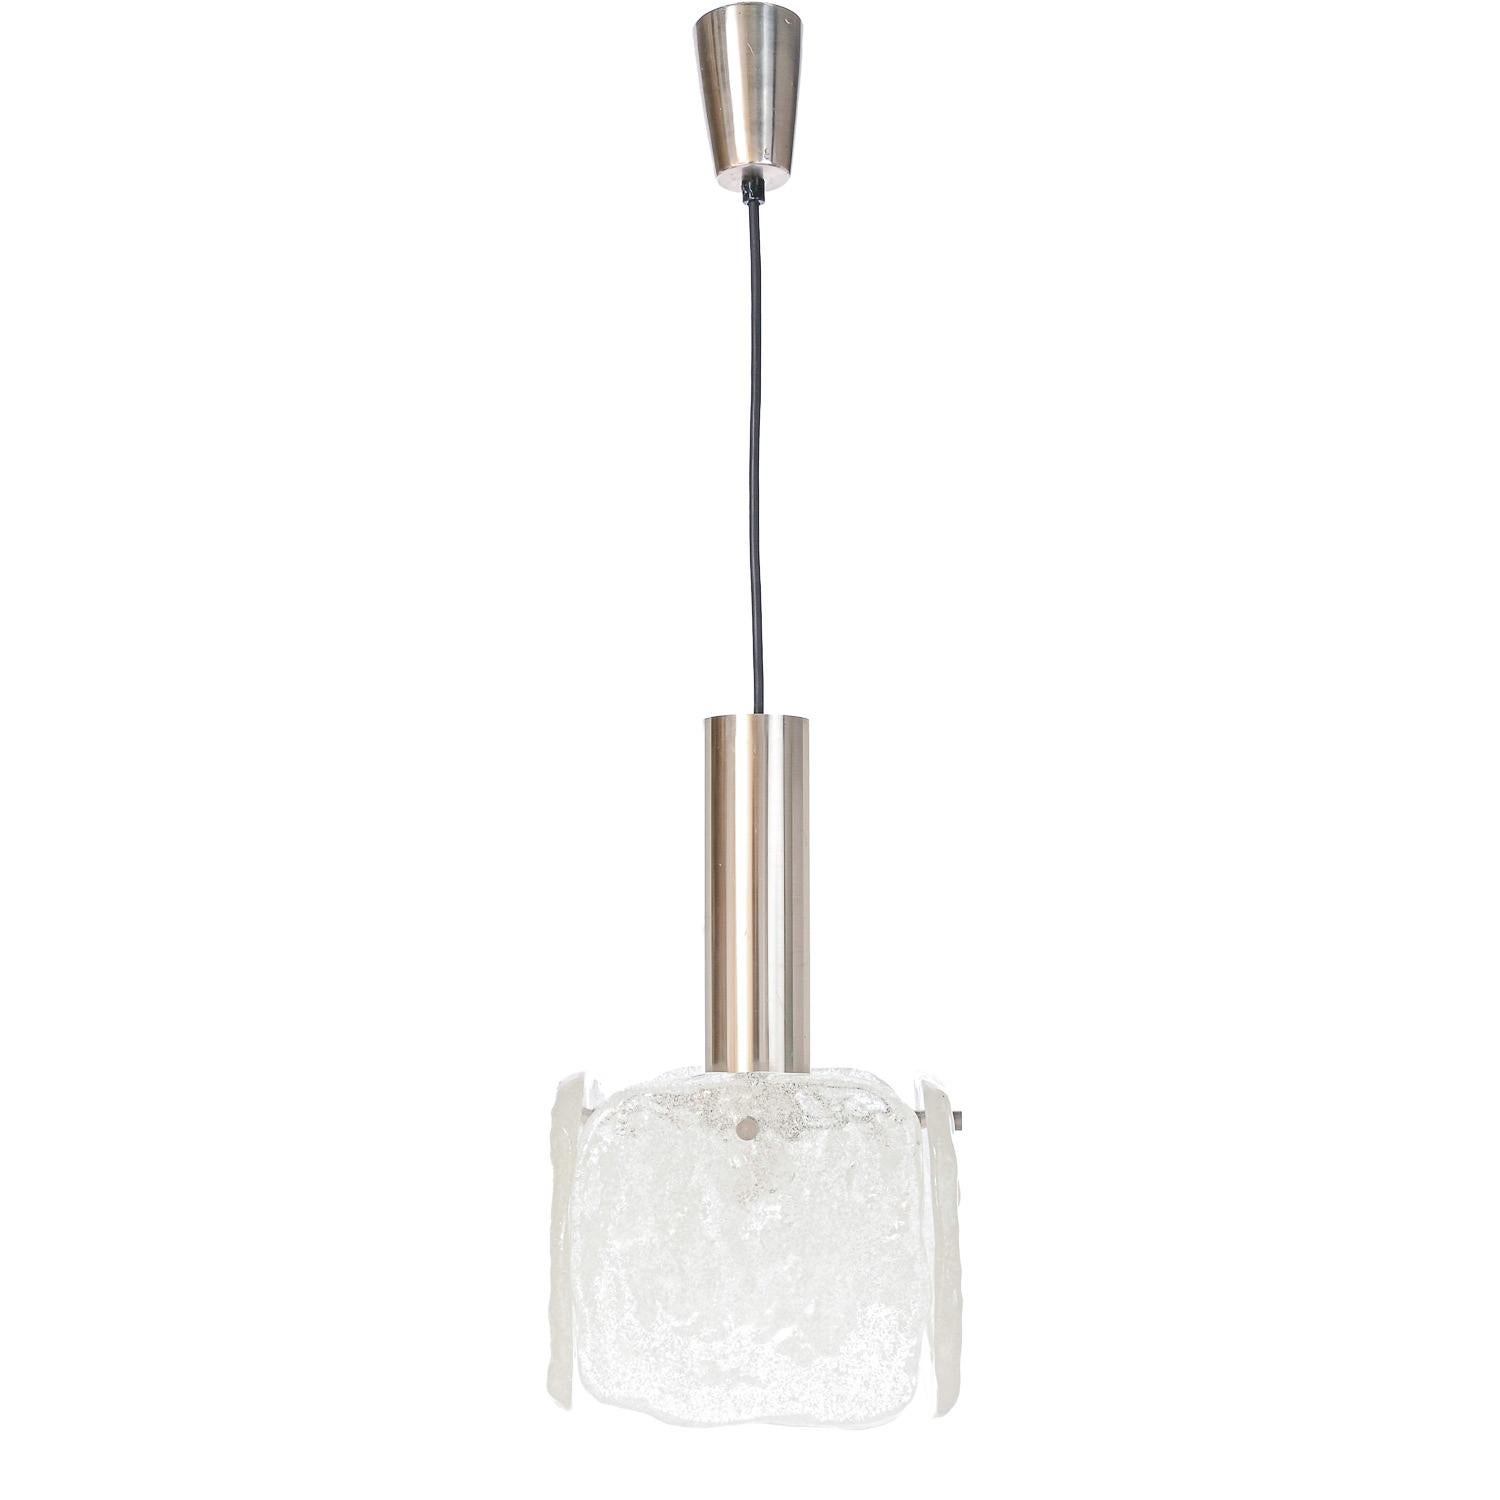 Stunning design, pendant has 4 large squares of white, opaque textured glass (each approximately 17cm x 17m) provides a nicely diffuse light. Manufactured by Kalmar, Austria in the 1960s.